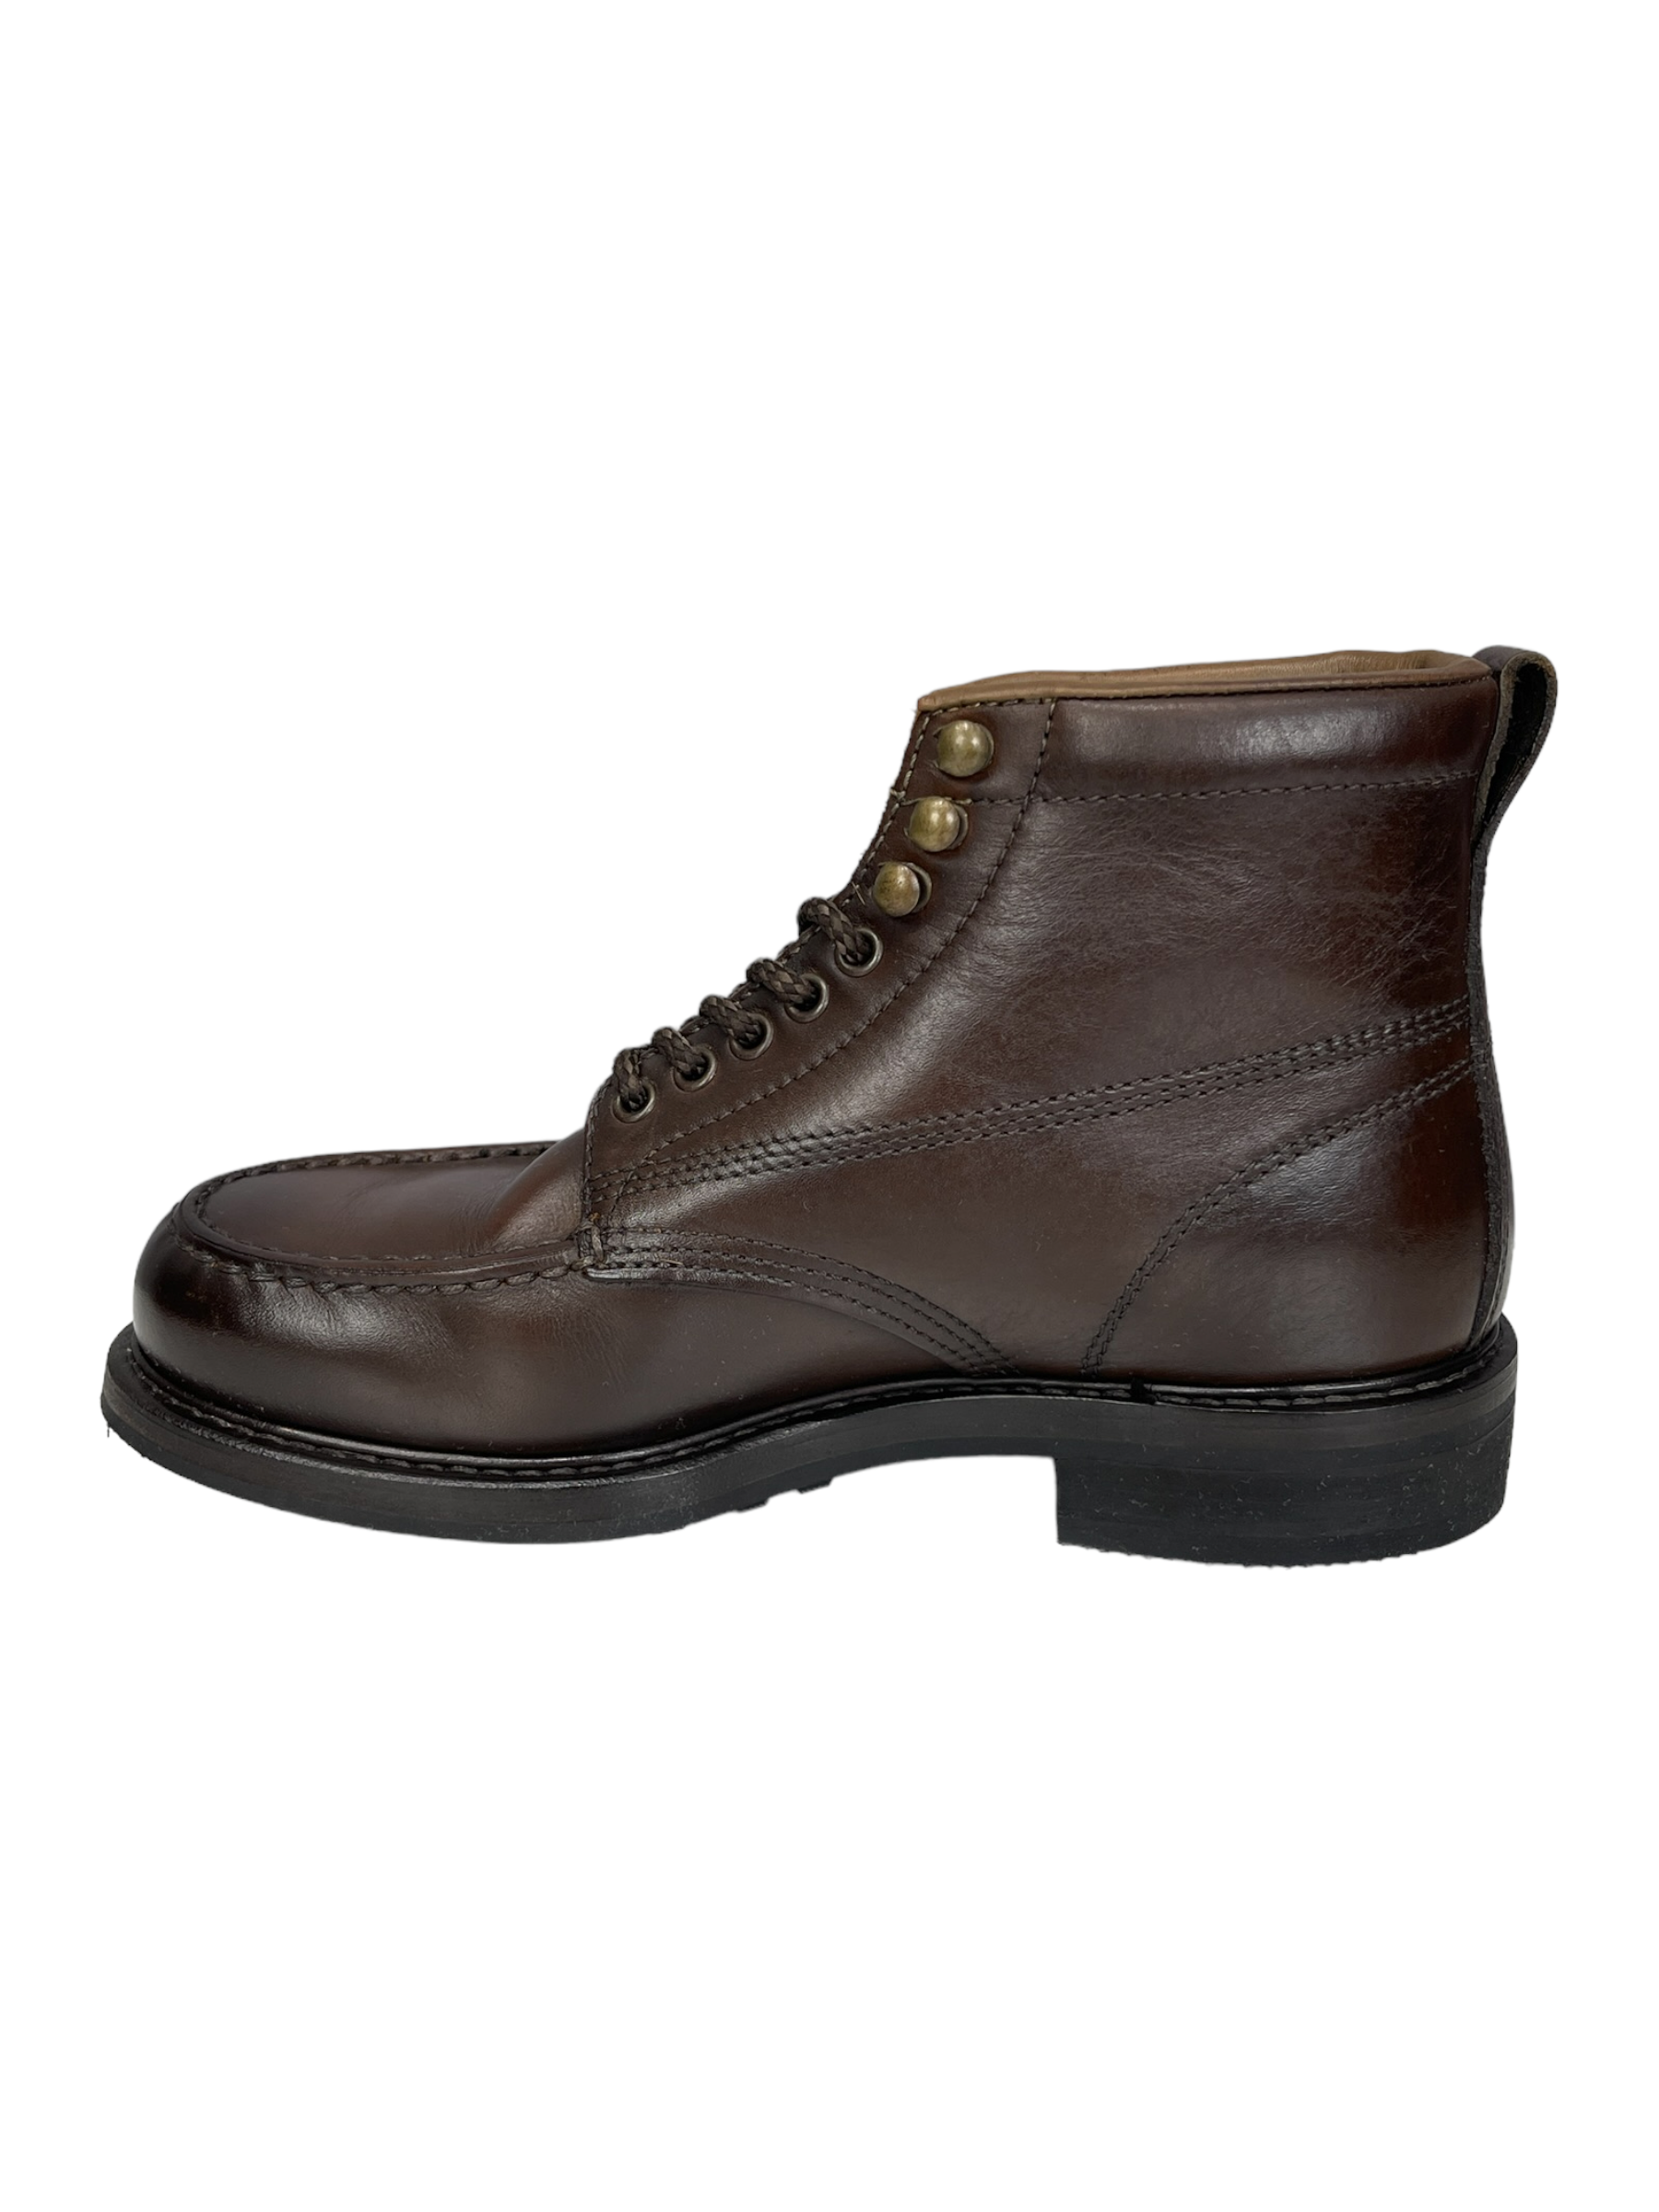 Tom Ford Brown Leather Work Boot 8 – Genuine Design Luxury Consignment